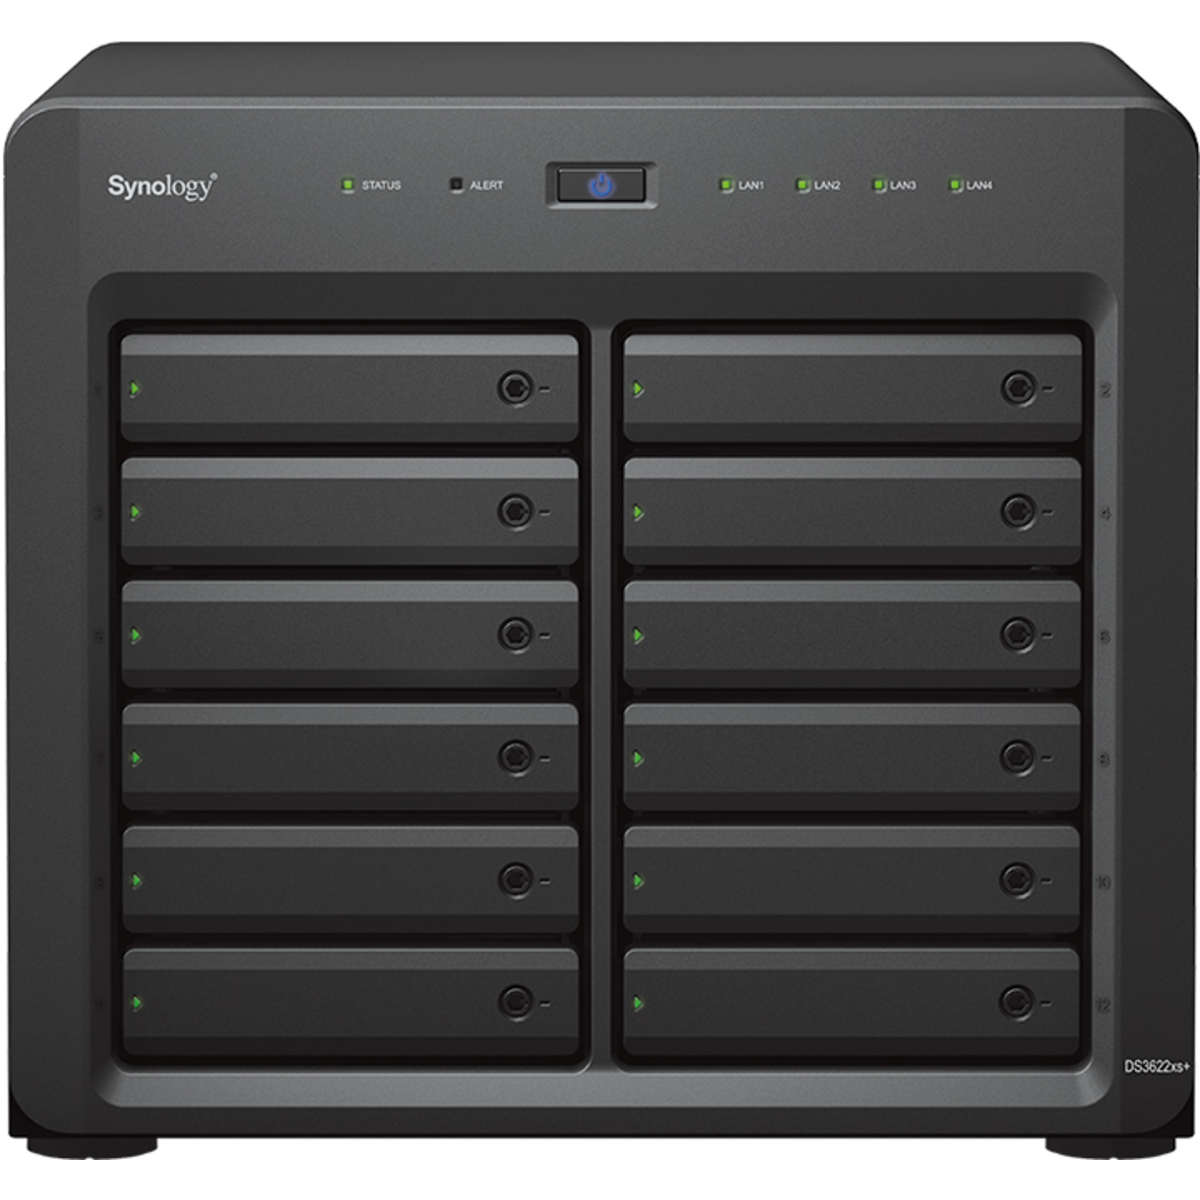 Synology DiskStation DS3622xs+ 160tb 12-Bay Desktop Multimedia / Power User / Business NAS - Network Attached Storage Device 10x16tb Synology HAT5300 Series HAT5300-16T 3.5 7200rpm SATA 6Gb/s HDD ENTERPRISE Class Drives Installed - Burn-In Tested DiskStation DS3622xs+